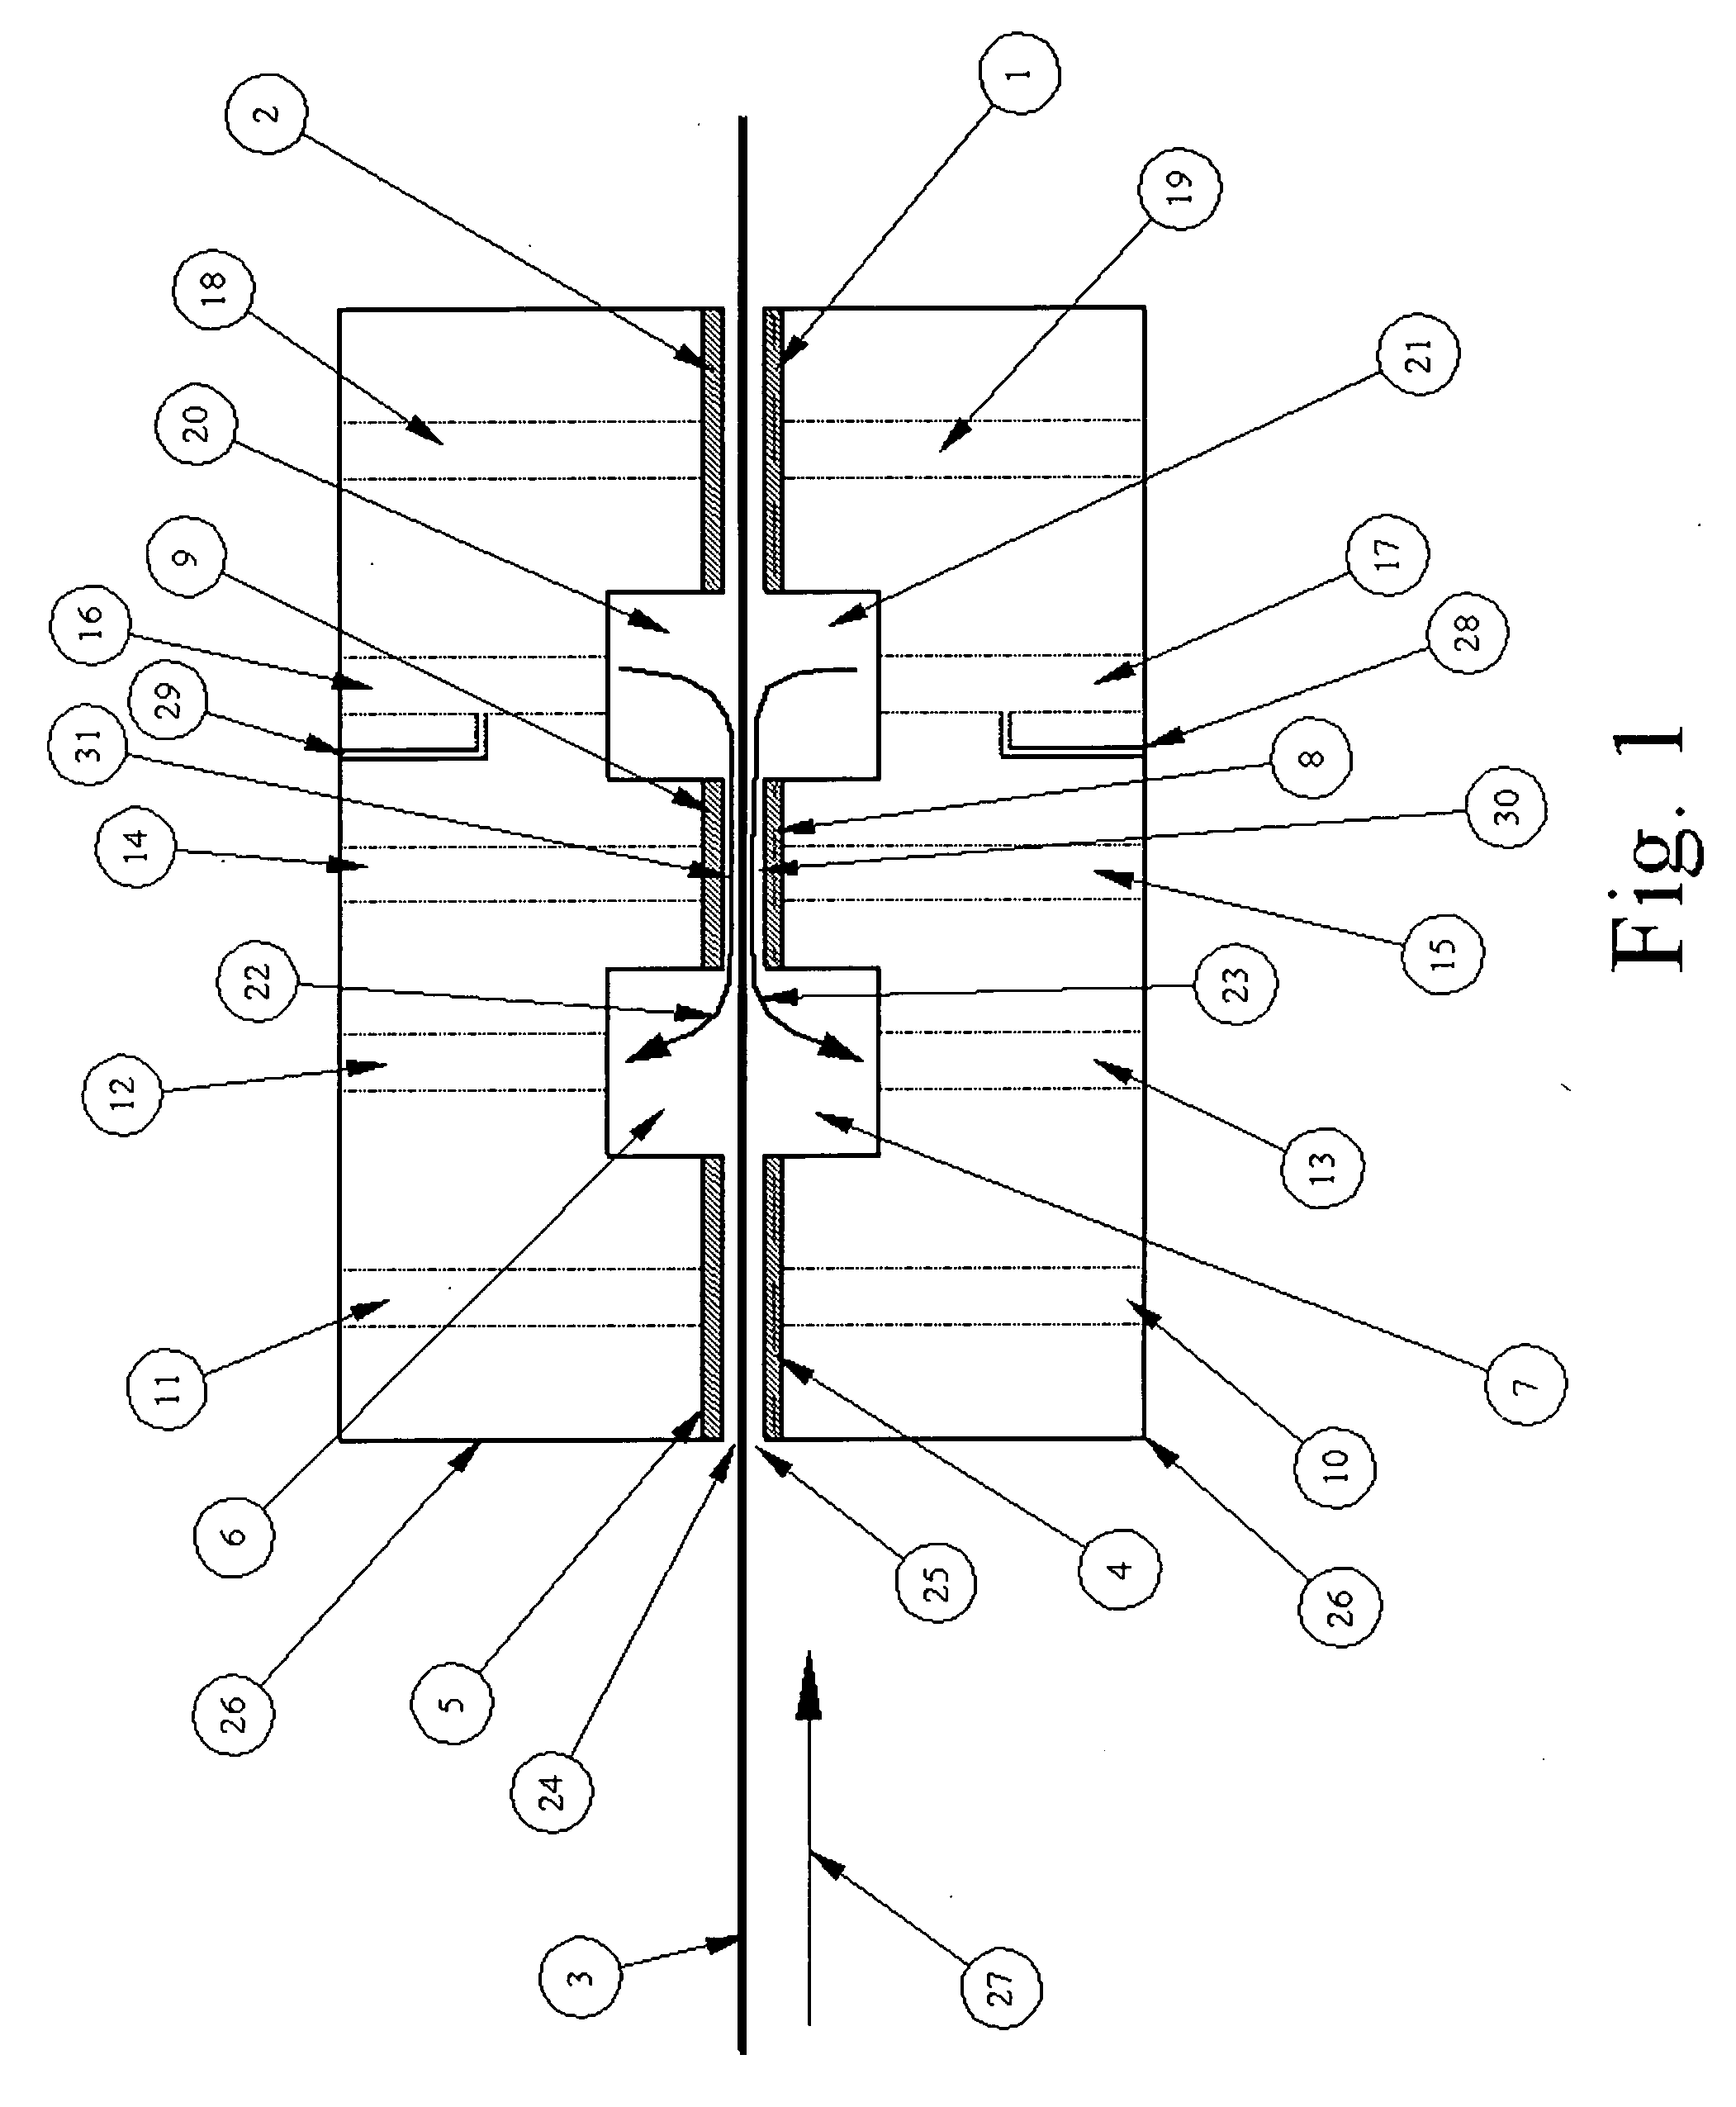 Method and apparatus for in-line processing and immediately sequential or simultaneous processing of flat and flexible substrates through viscous shear in thin cross section gaps for the manufacture of micro-electronic circuits or displays